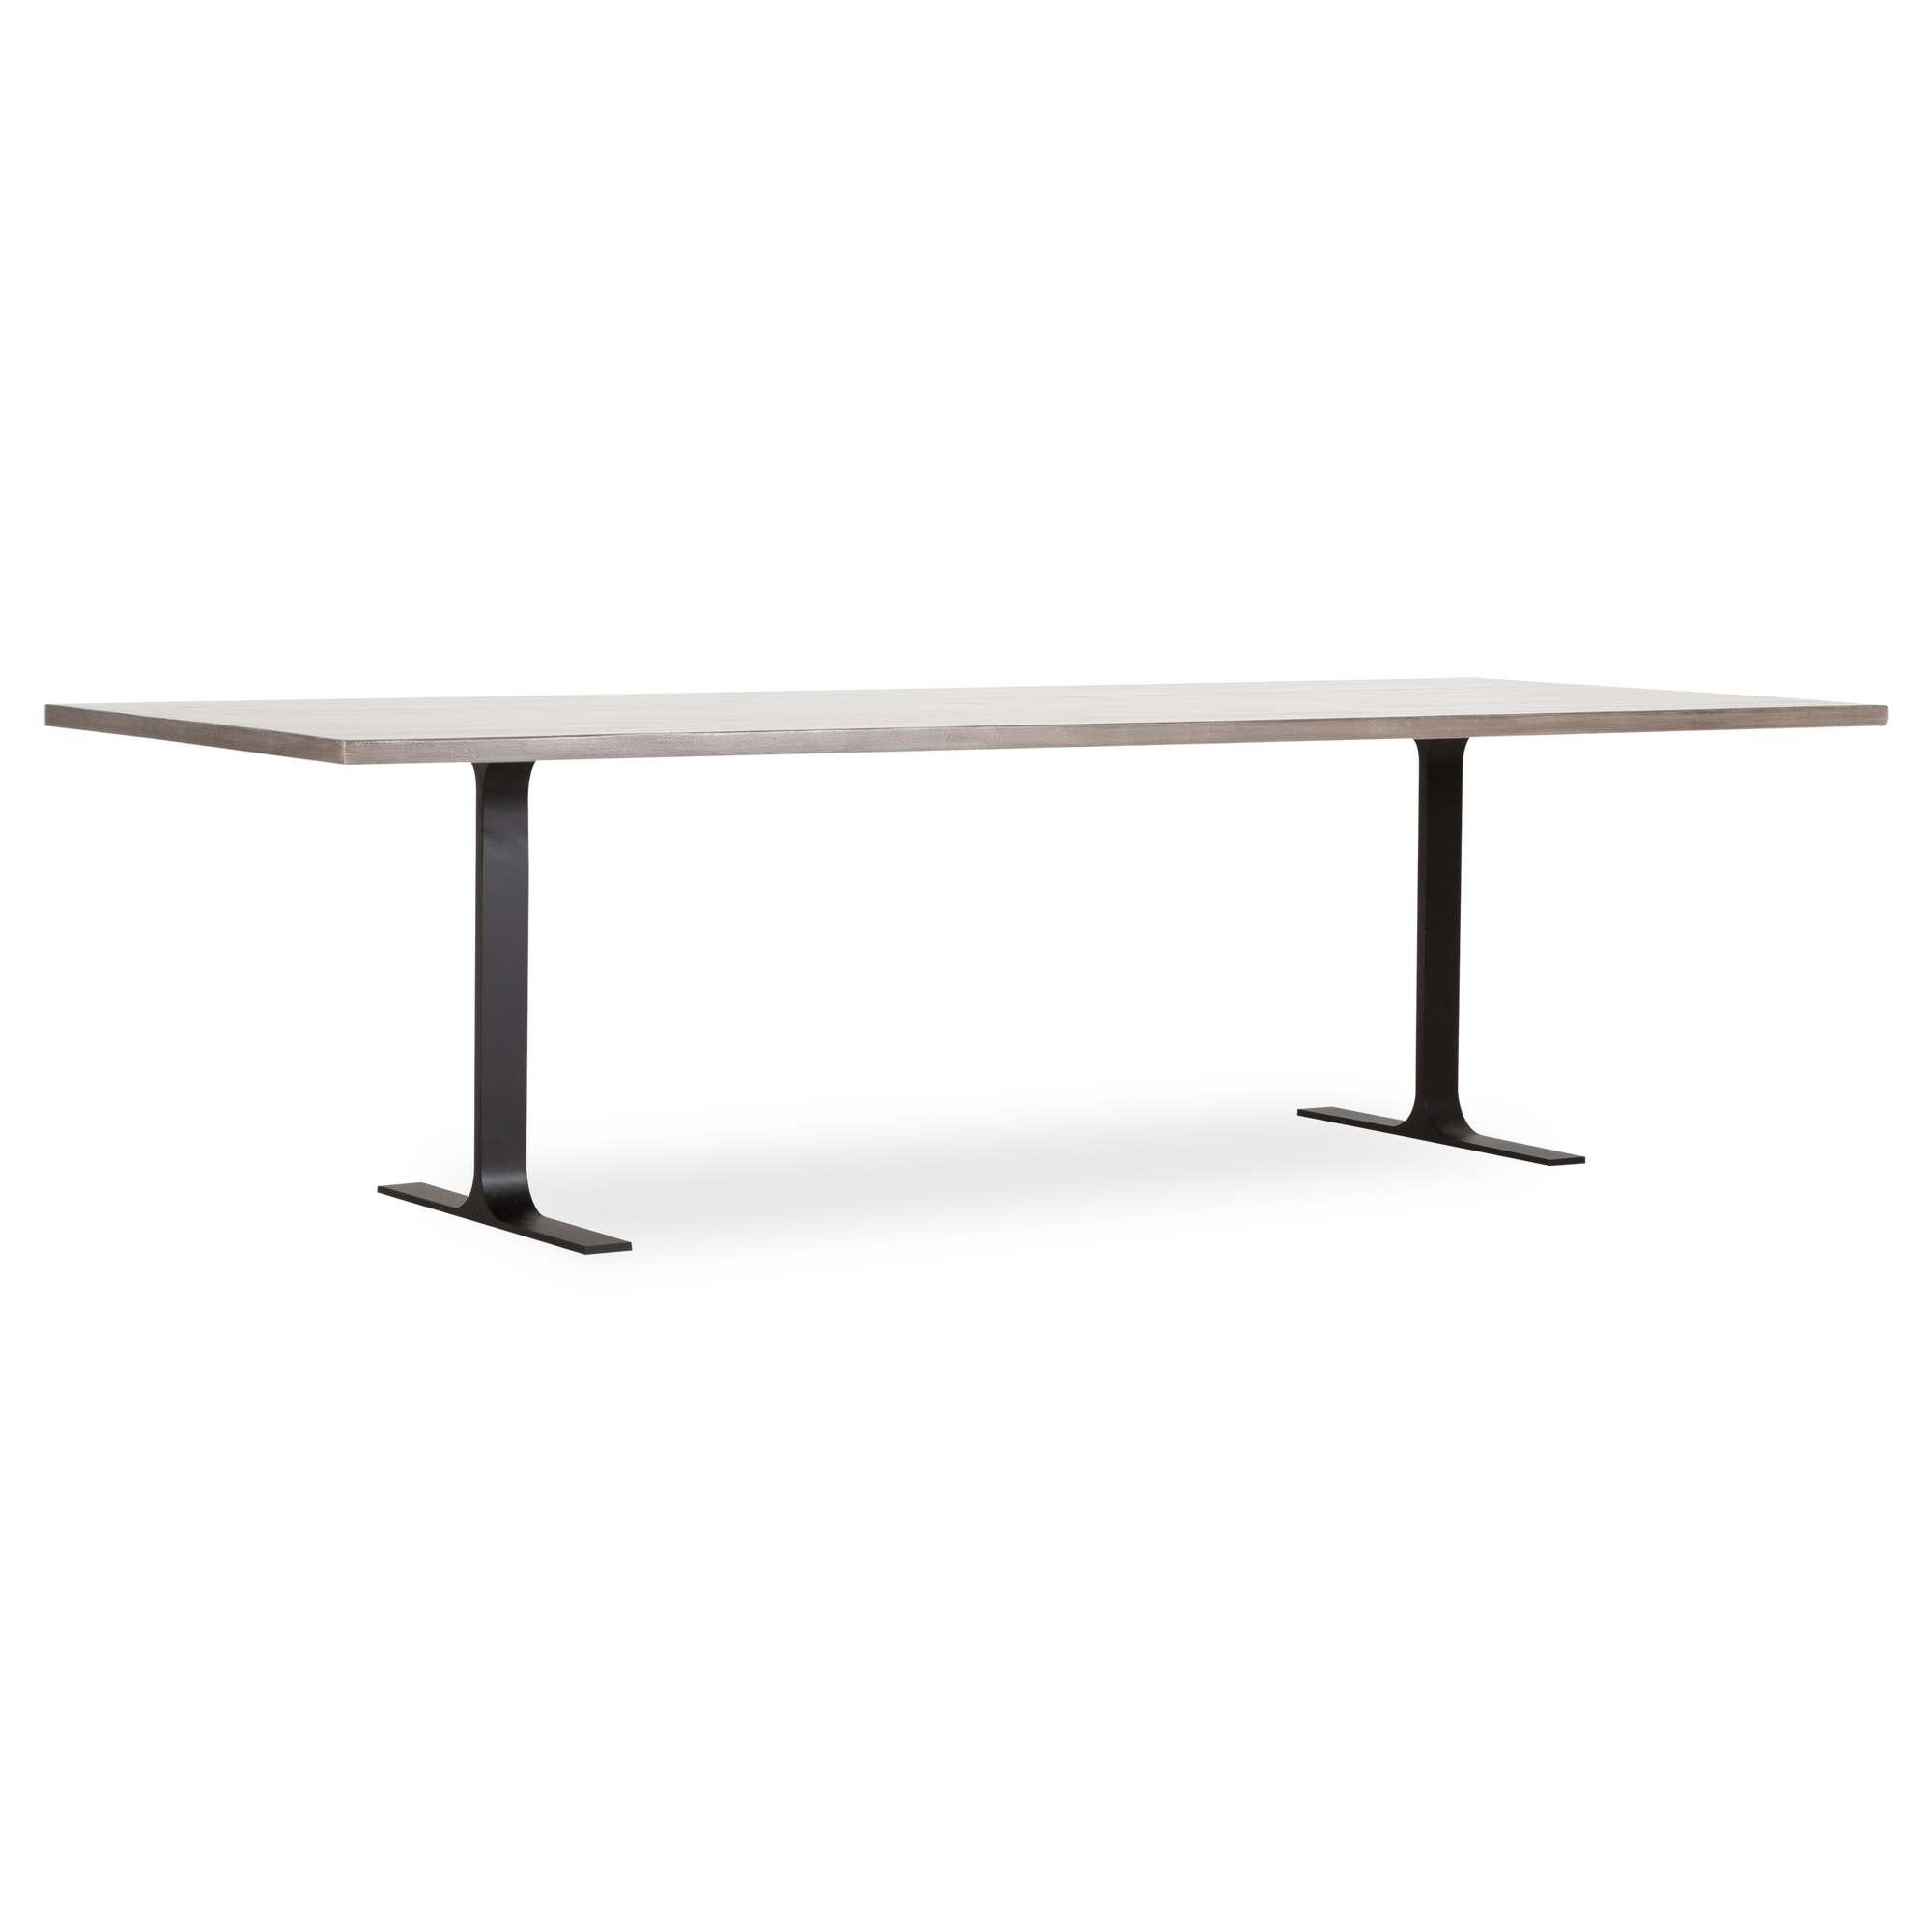 Crafted in Los Angeles, California, the Dresden Dining Table is a beautiful display of solid reclaimed wood set on elegantly curved T-shaped metal legs for a rustic modern feel.